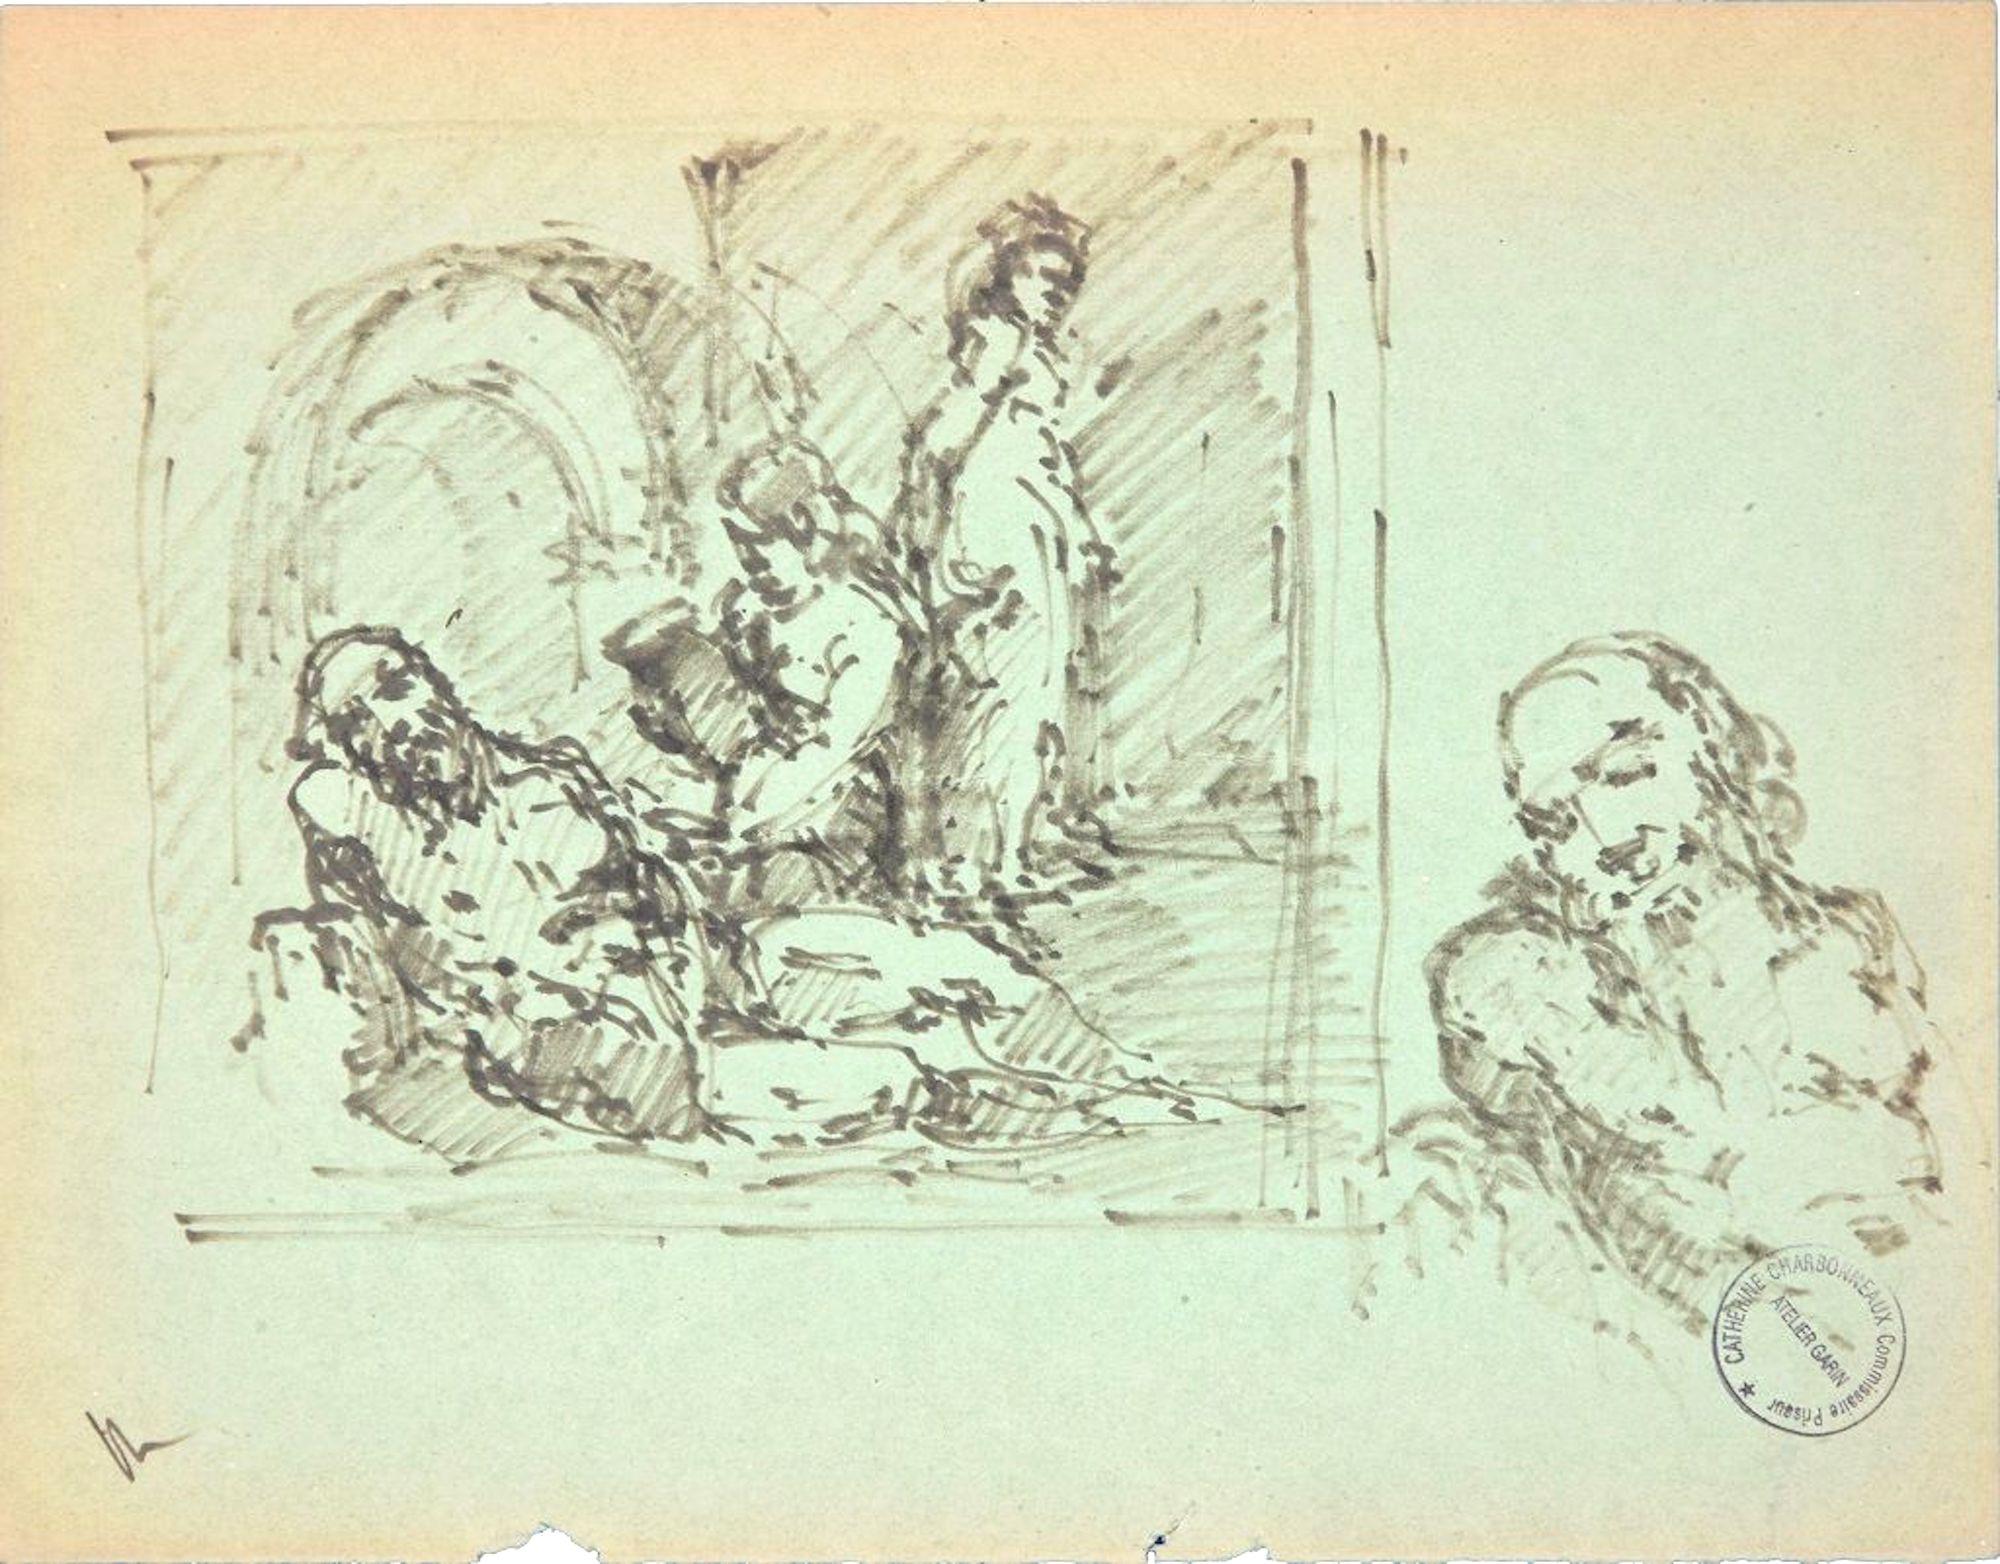 The Rest is an original pen drawing on paper, realized by the French artist Paul Garin (Nice, 1898-1963) in the 1950s. 

Black ink stamp on the lower-right corner: "Catherine Charbonneux Commissaire Priseur - Atelier Garin".

The drawing represents